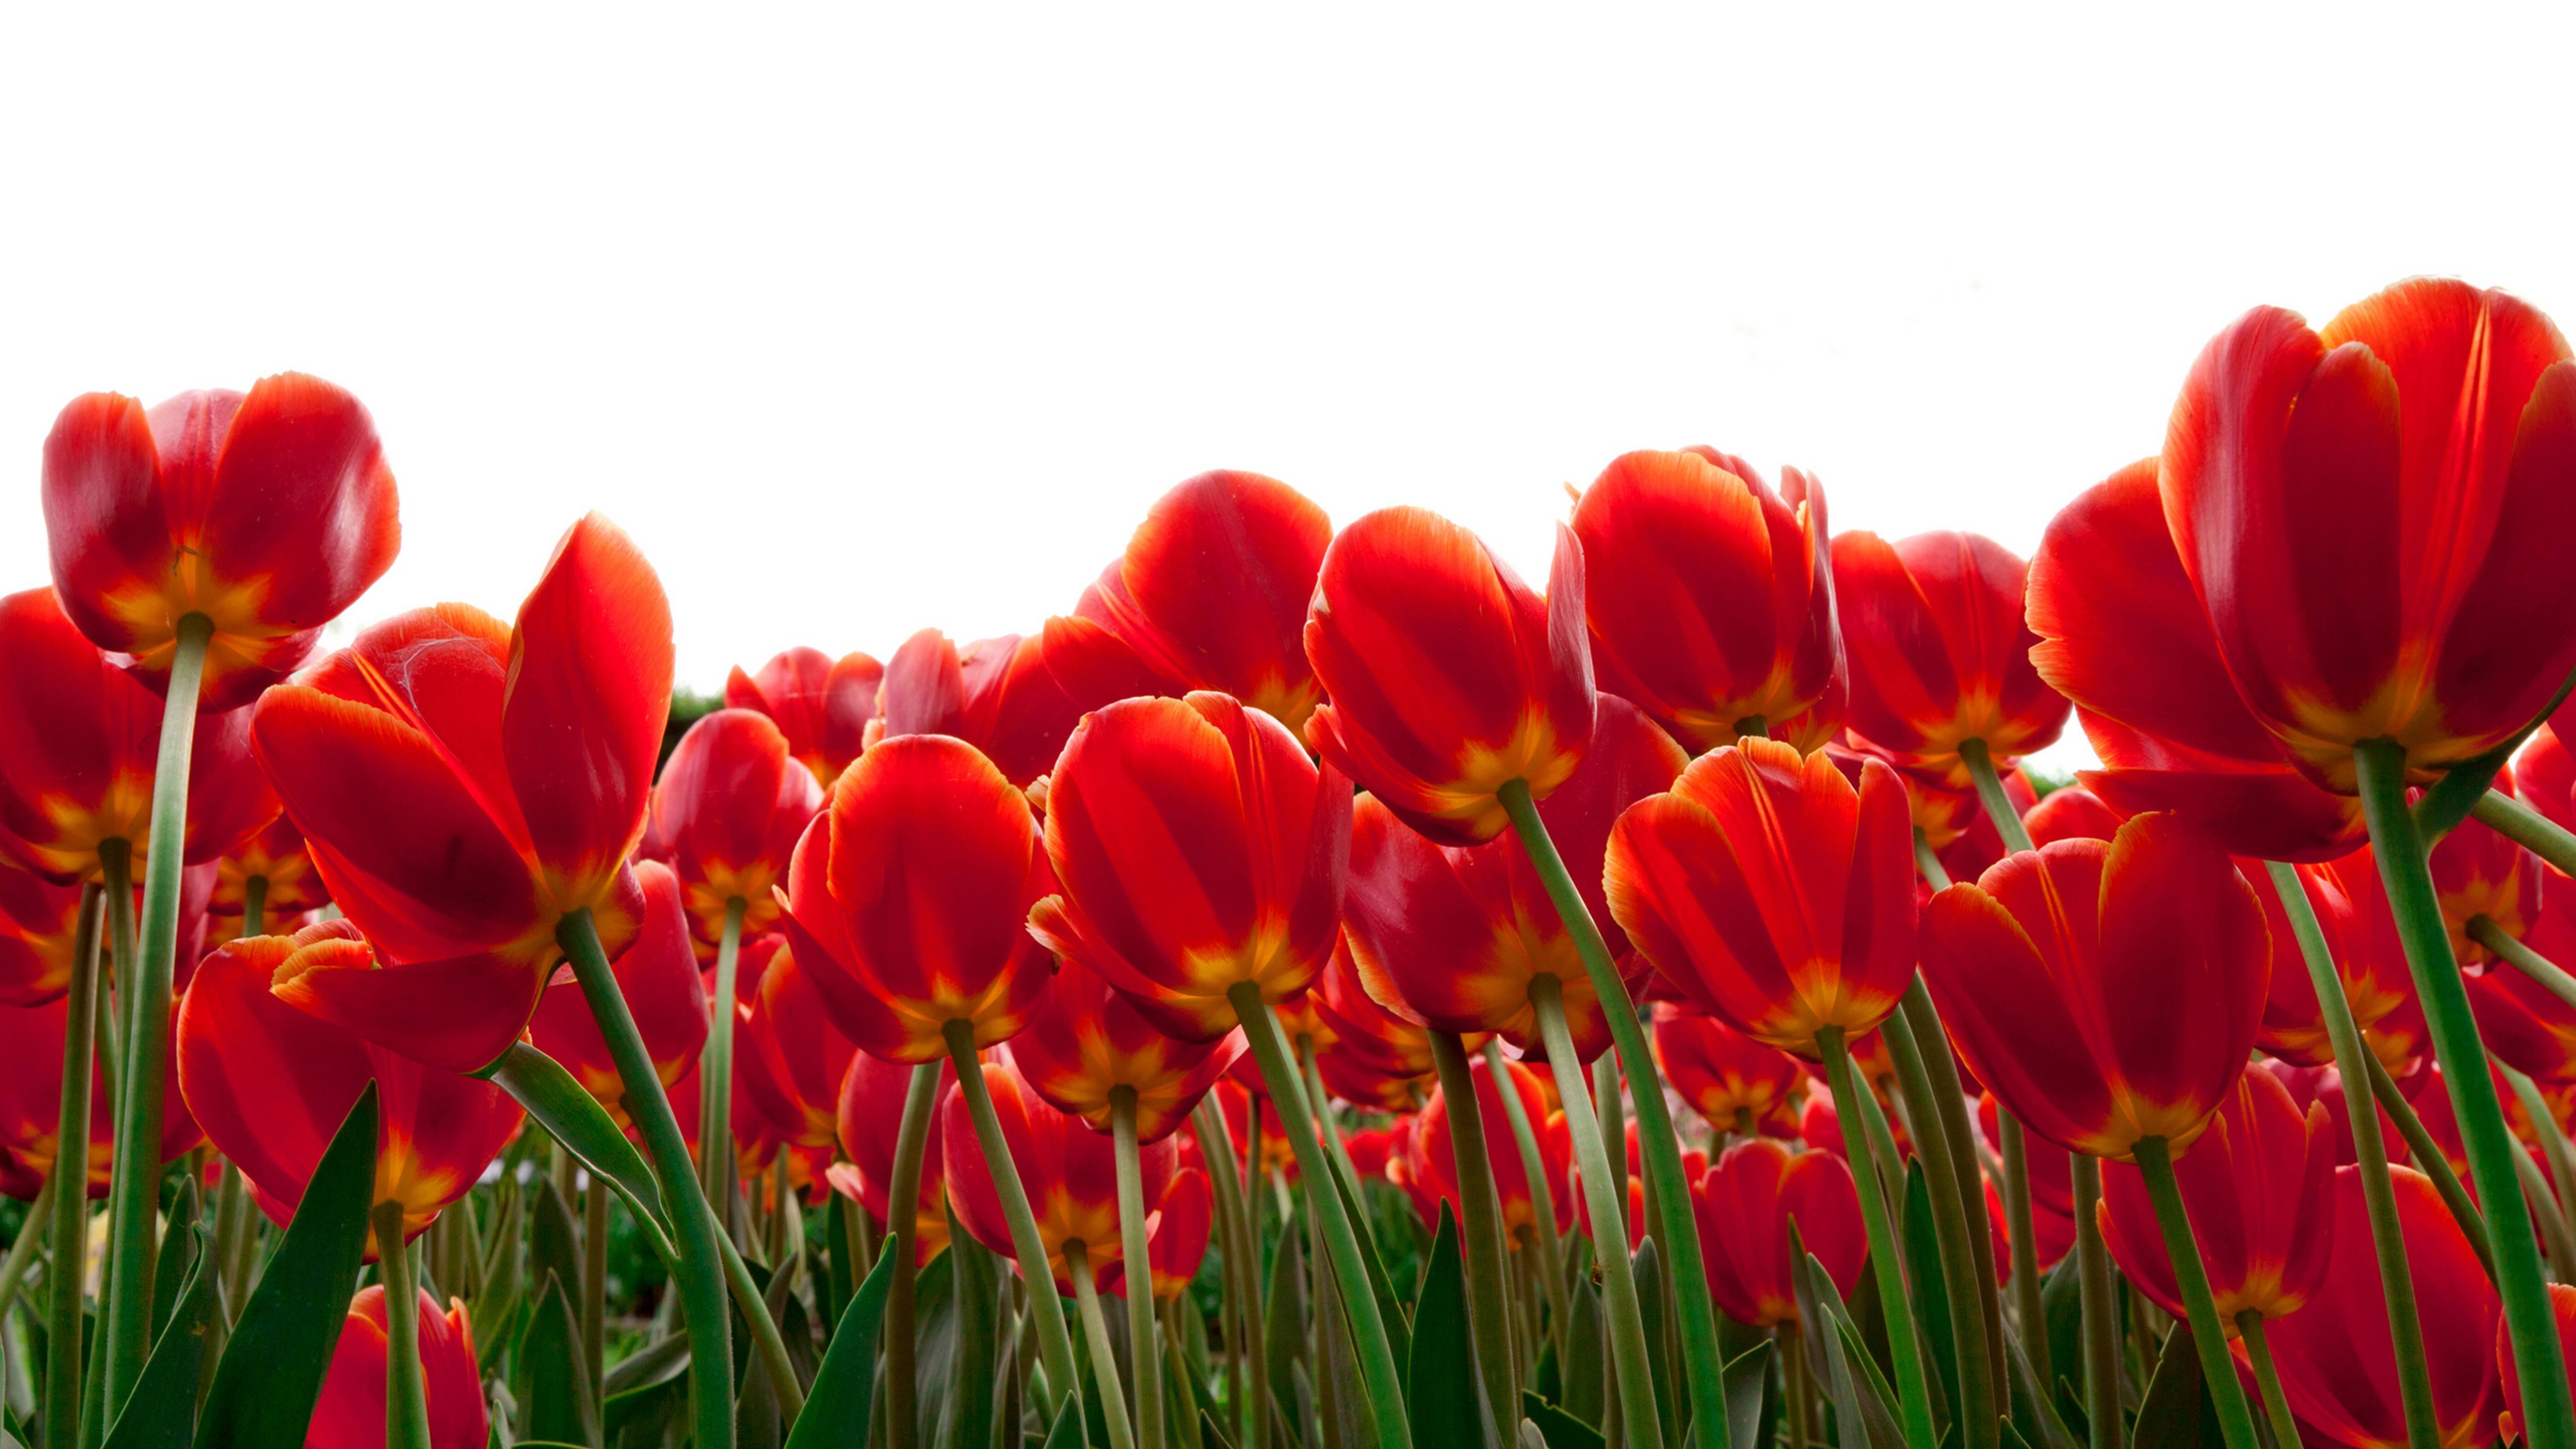 Flowers Red Tulips 4K wallpapers (Desktop, Phone, Tablet) - Awesome ...